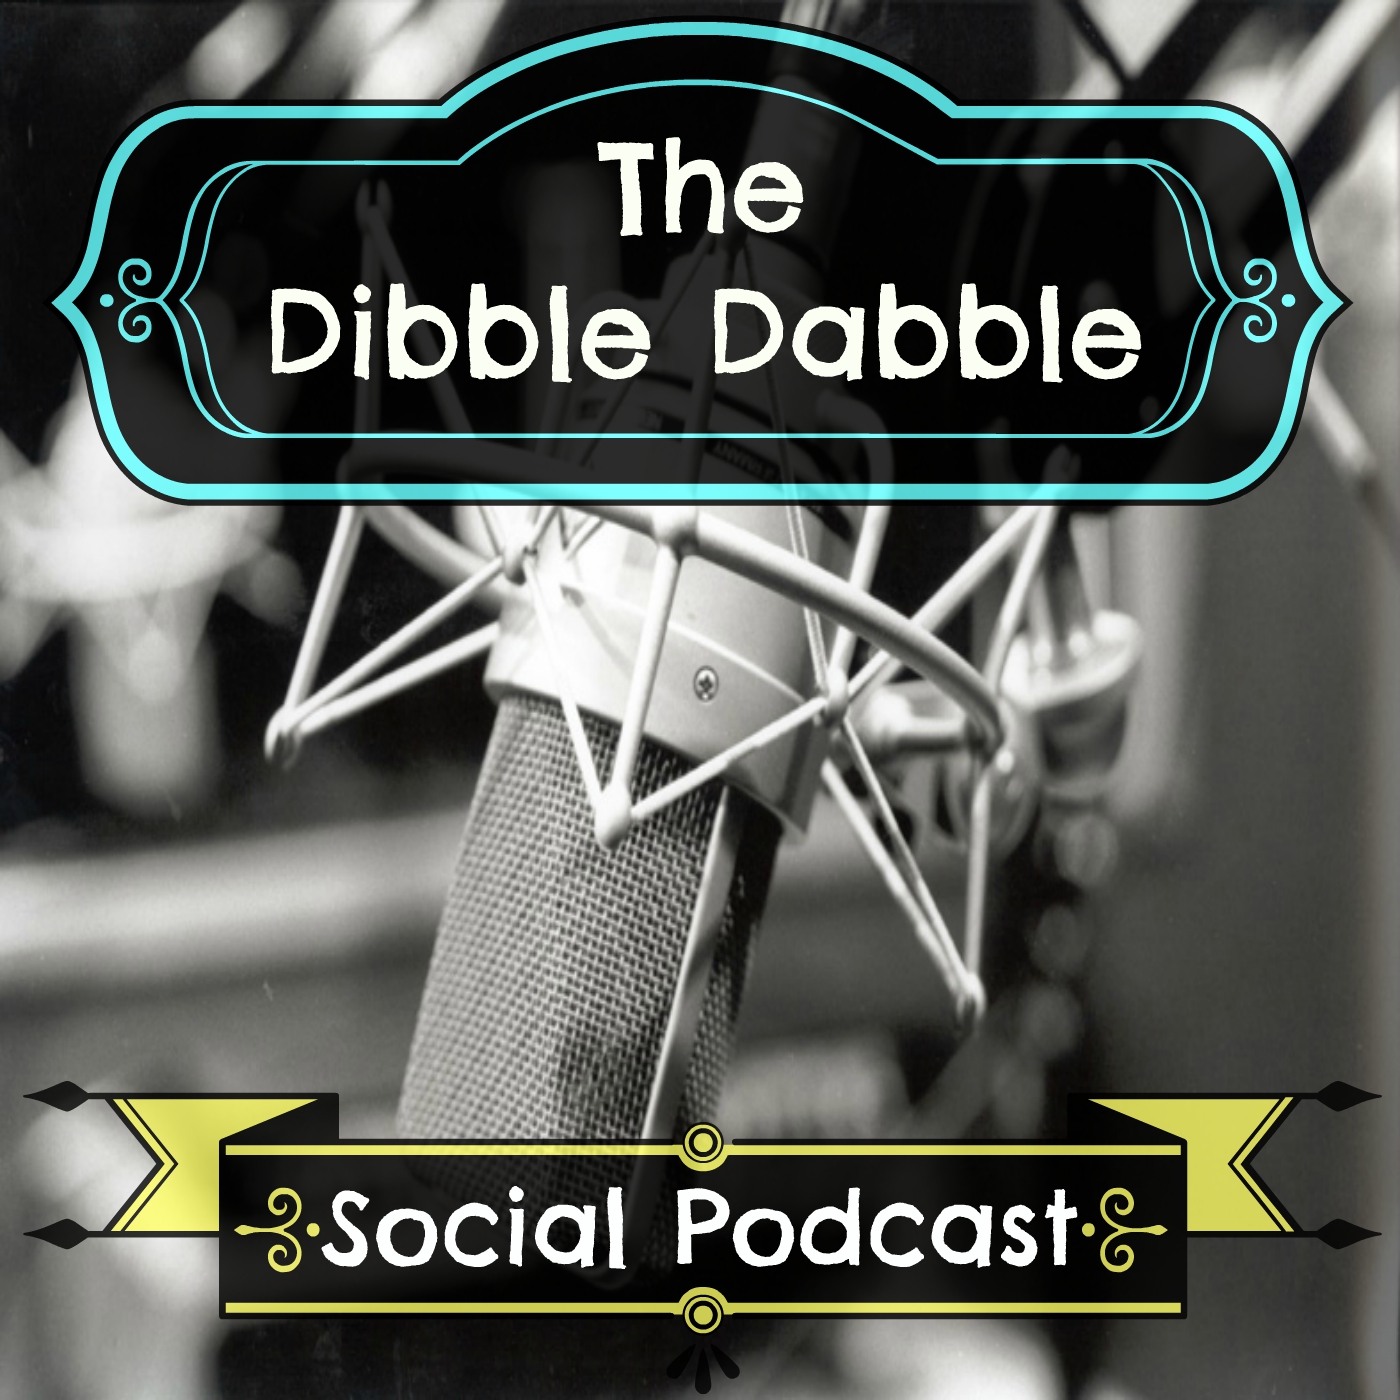 The Dibble Dabble Podcast